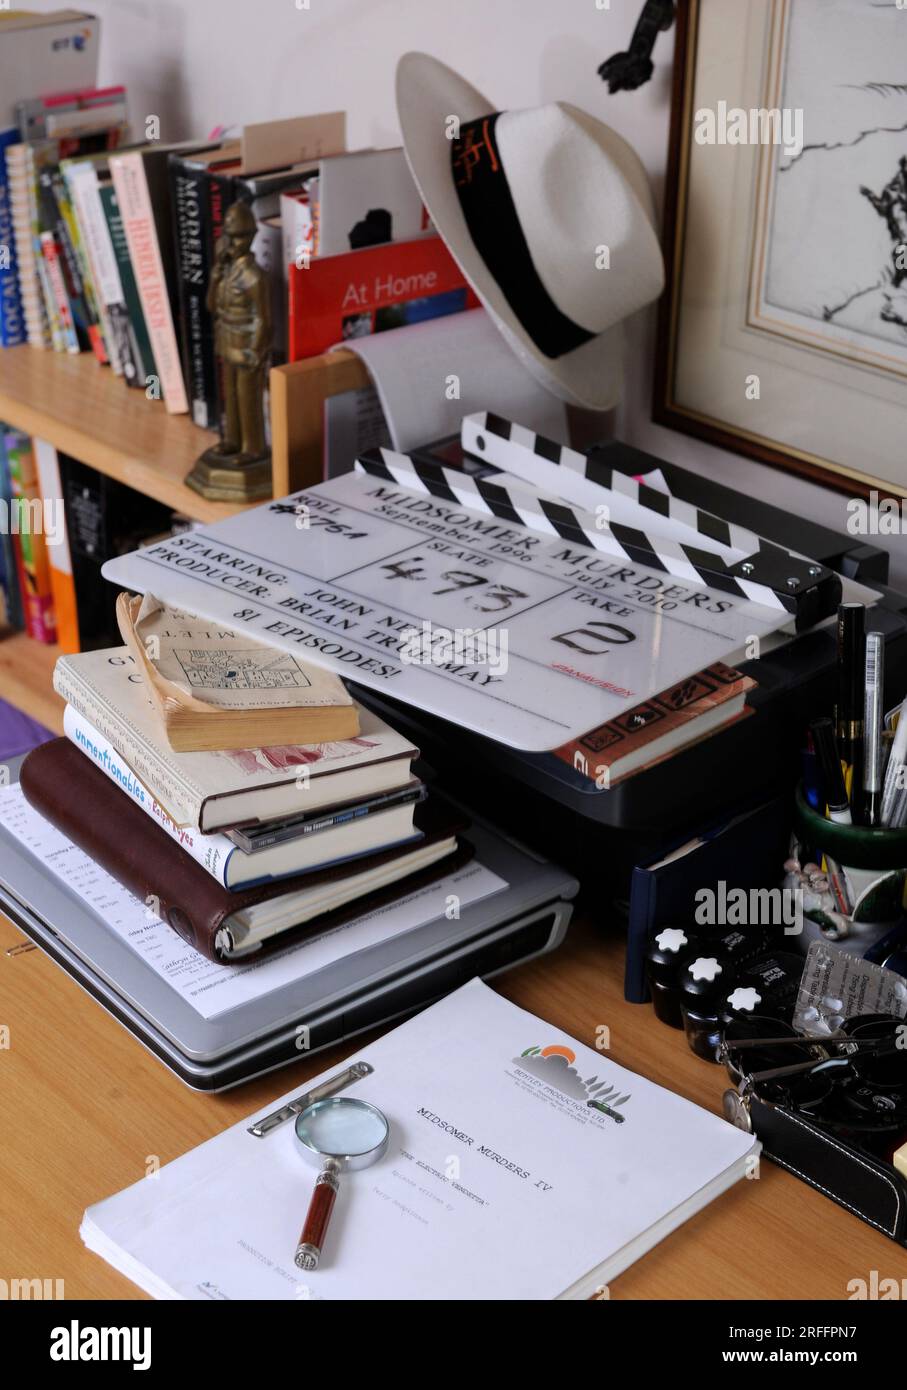 An old clapperboard and script from the long running British crime drama television series Midsomer Murders. Stock Photo